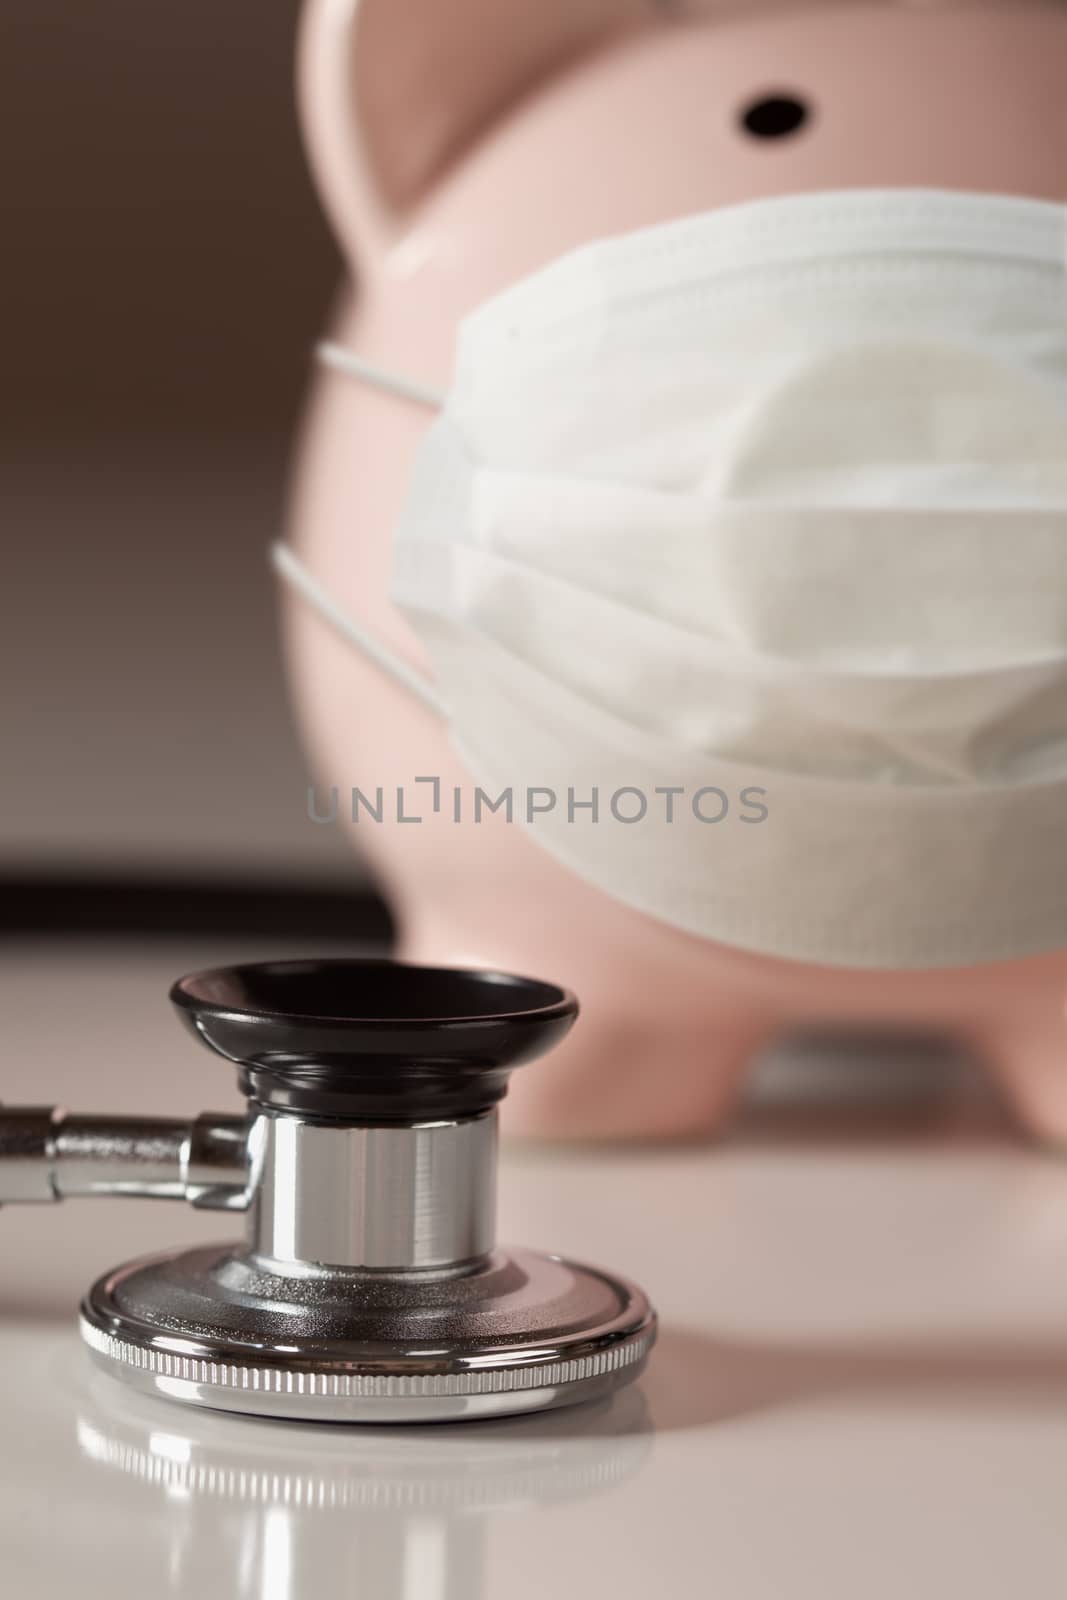 Stethoscope and Piggy Bank Wearing Protective Medical Face Mask by Feverpitched